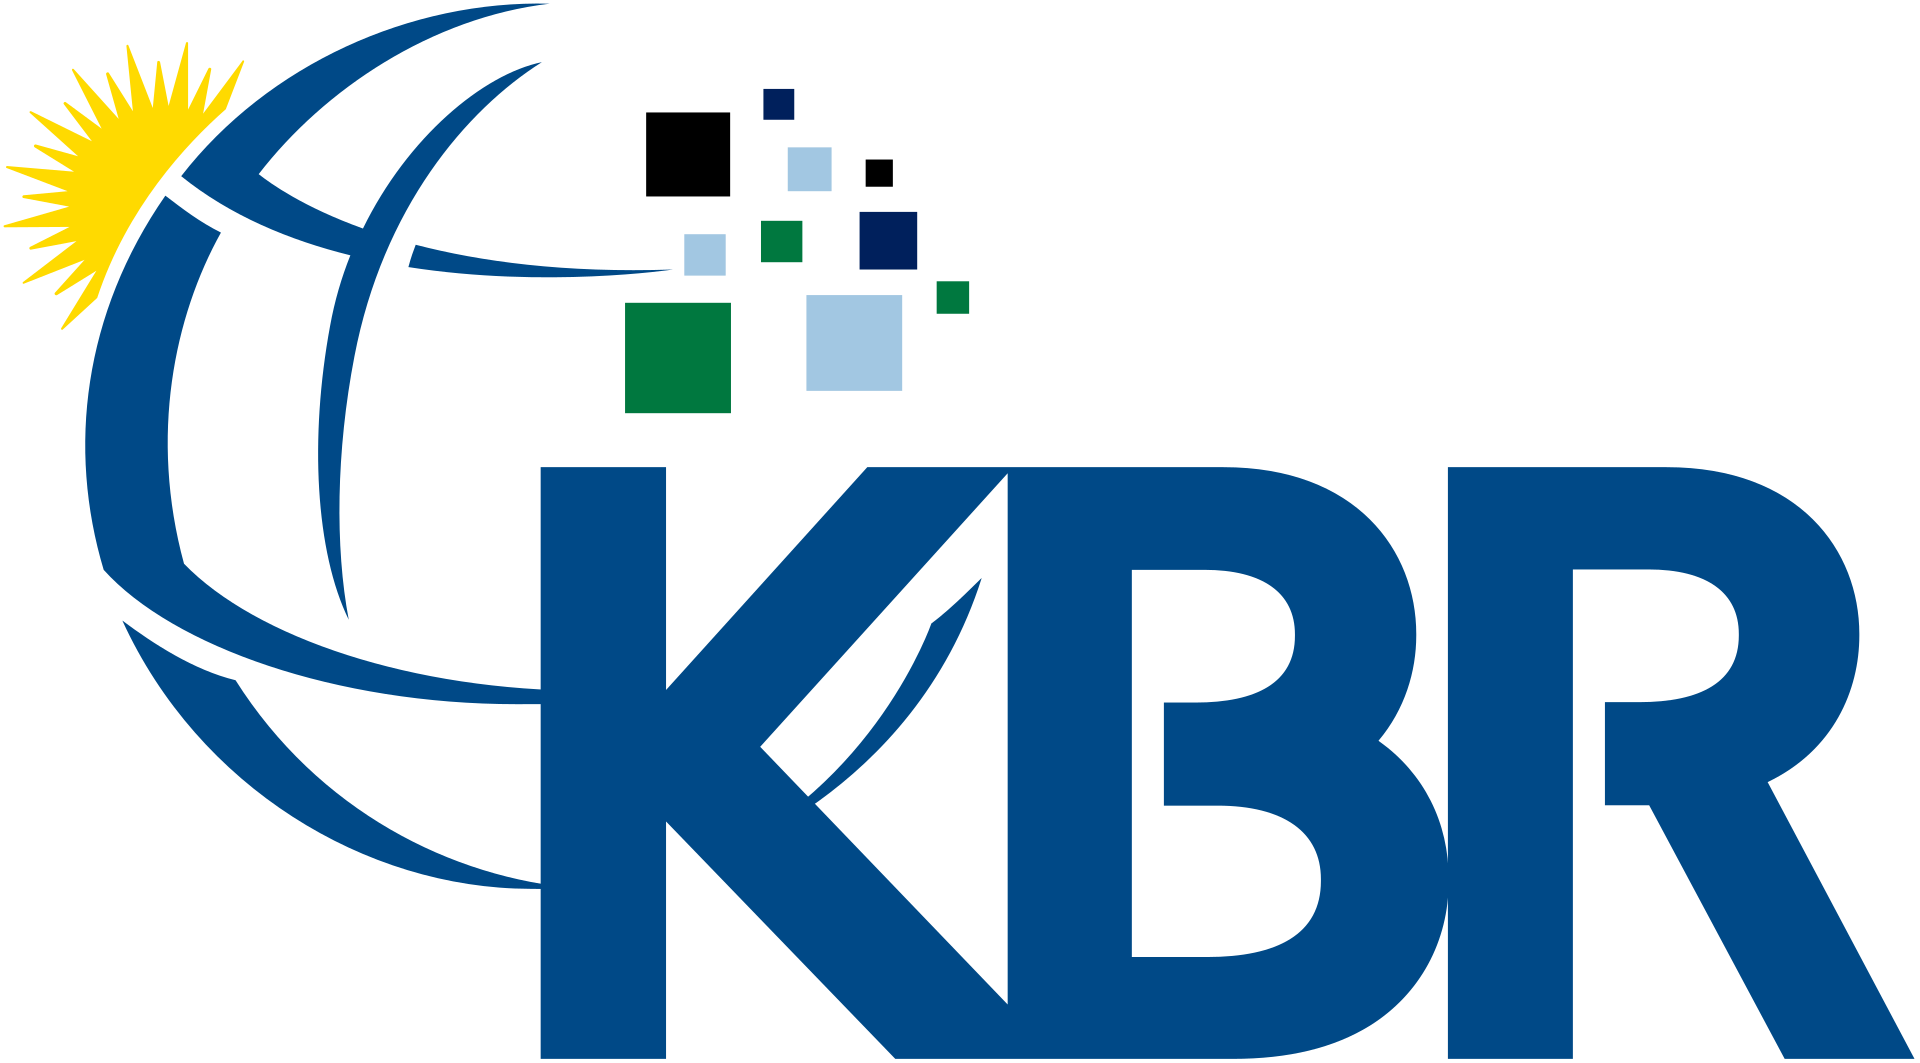 KBR, Inc. logo, By Source (WP:NFCC#4), Fair use, https://en.wikipedia.org/w/index.php?curid=61420148